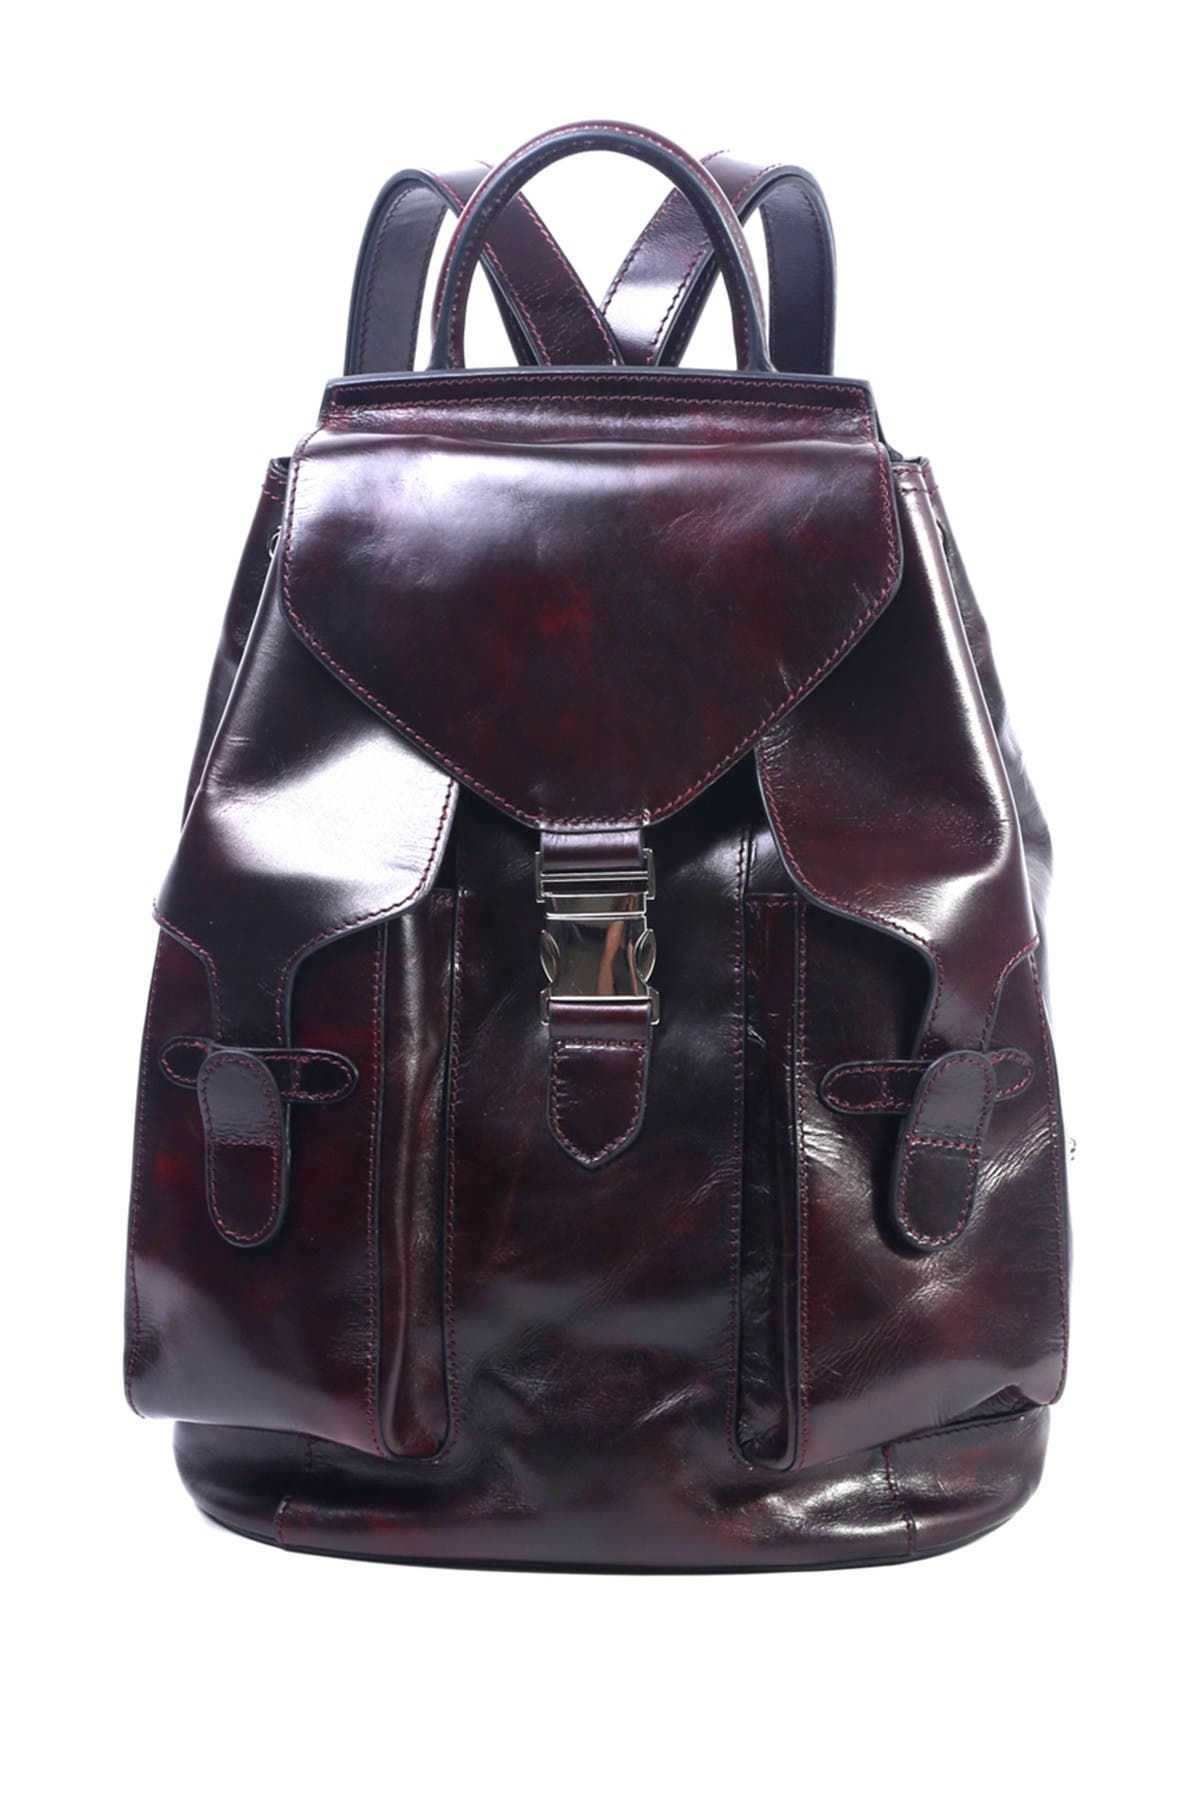 OLD TREND ROCK VALLEY LEATHER BACKPACK,709257406046